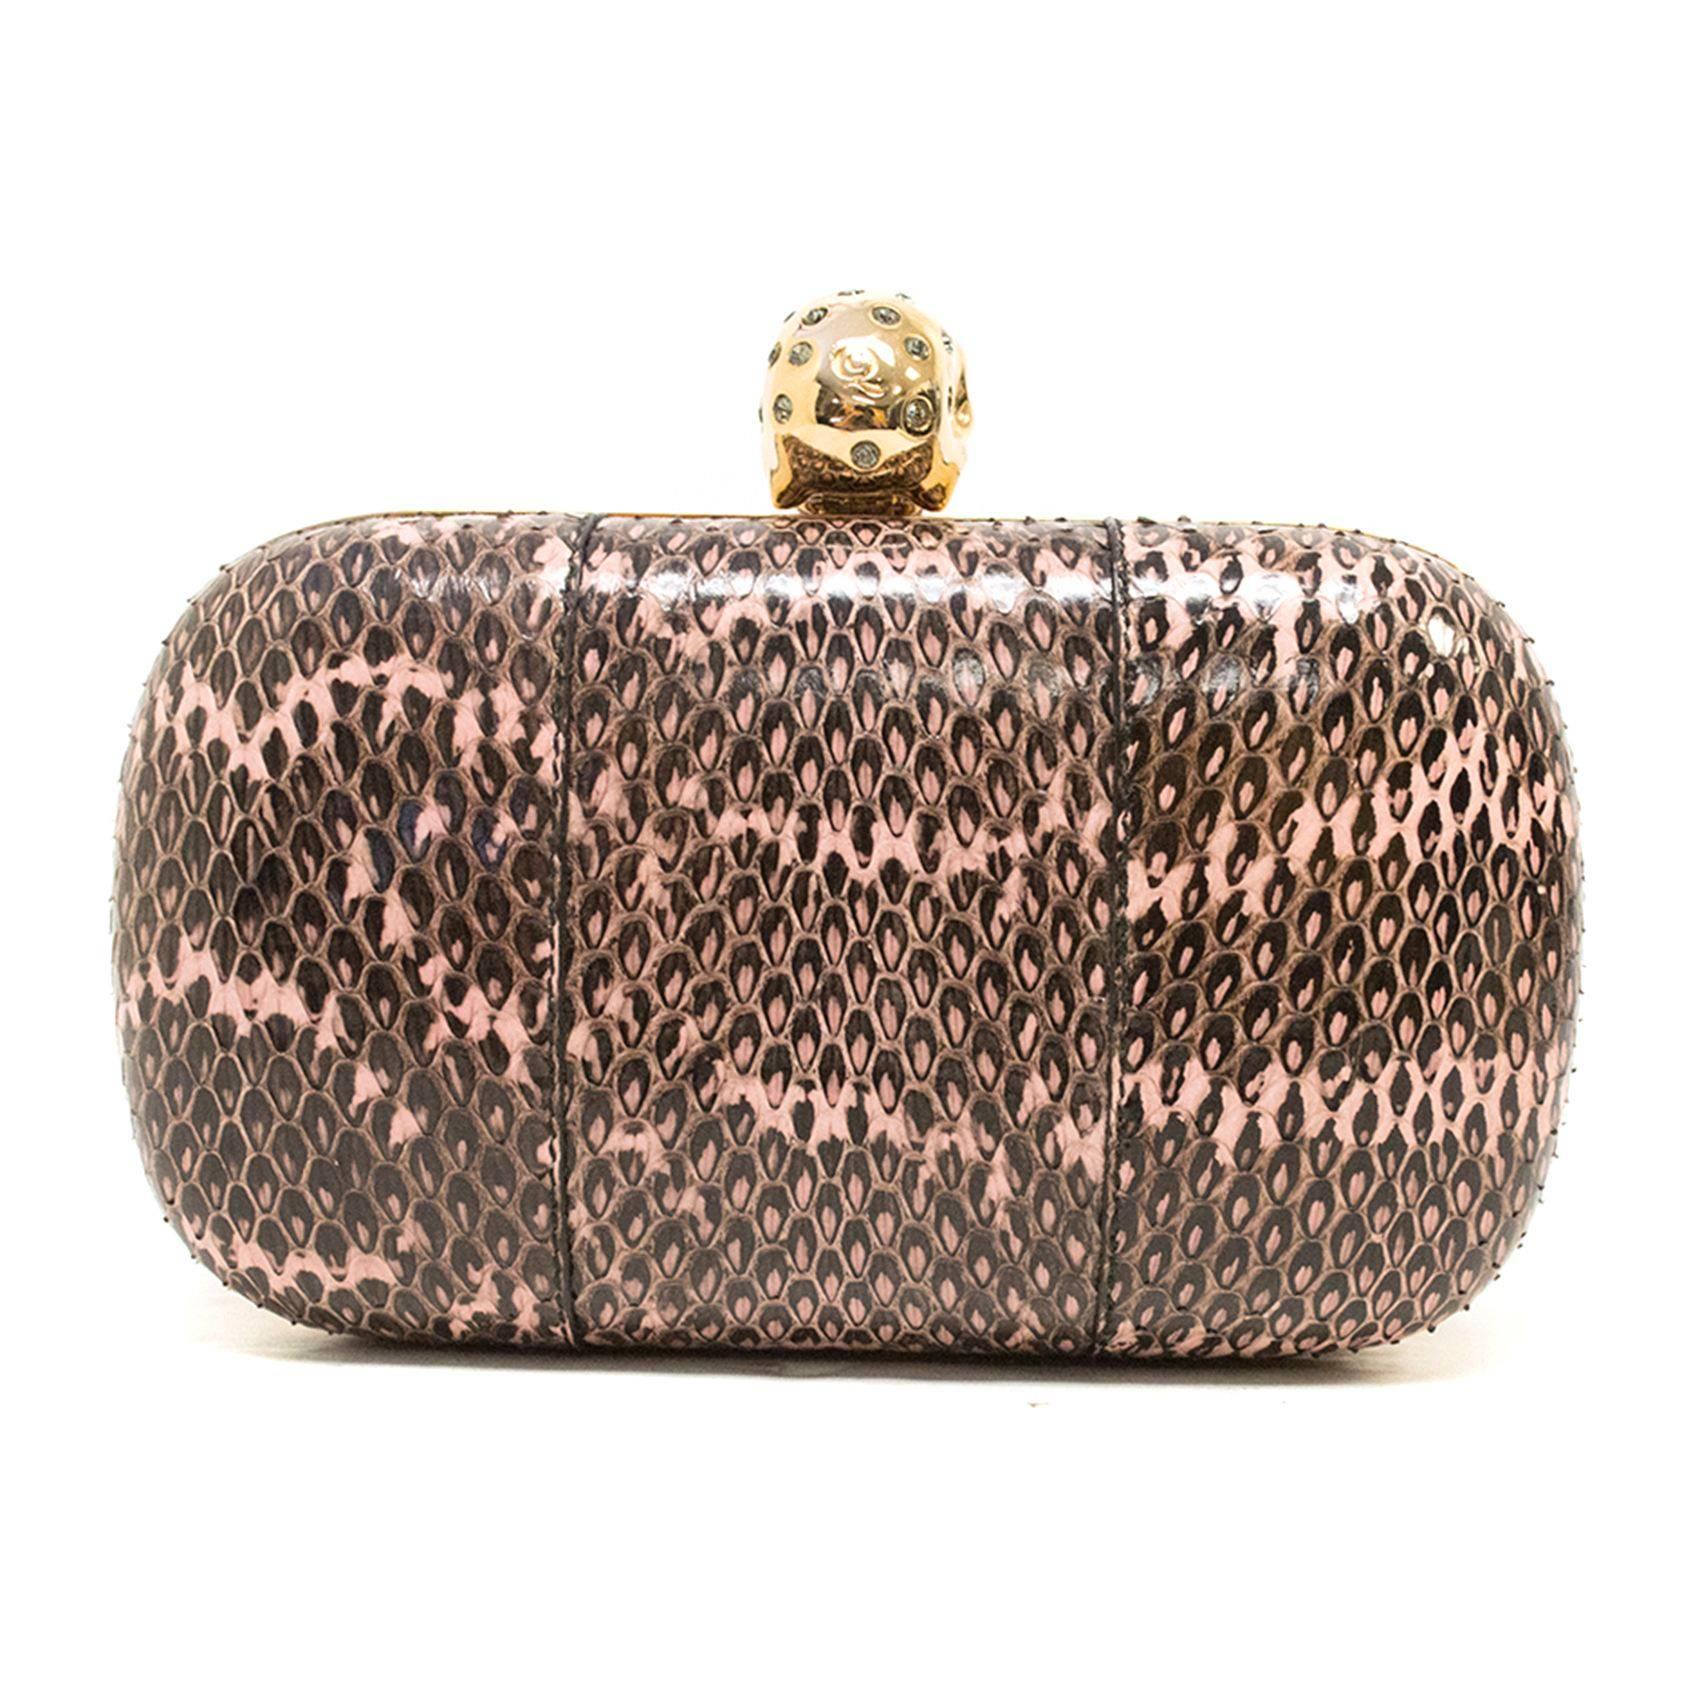 Alexander McQueen Pink And Black Python 'Skull' Box Clutch In Good Condition For Sale In London, GB